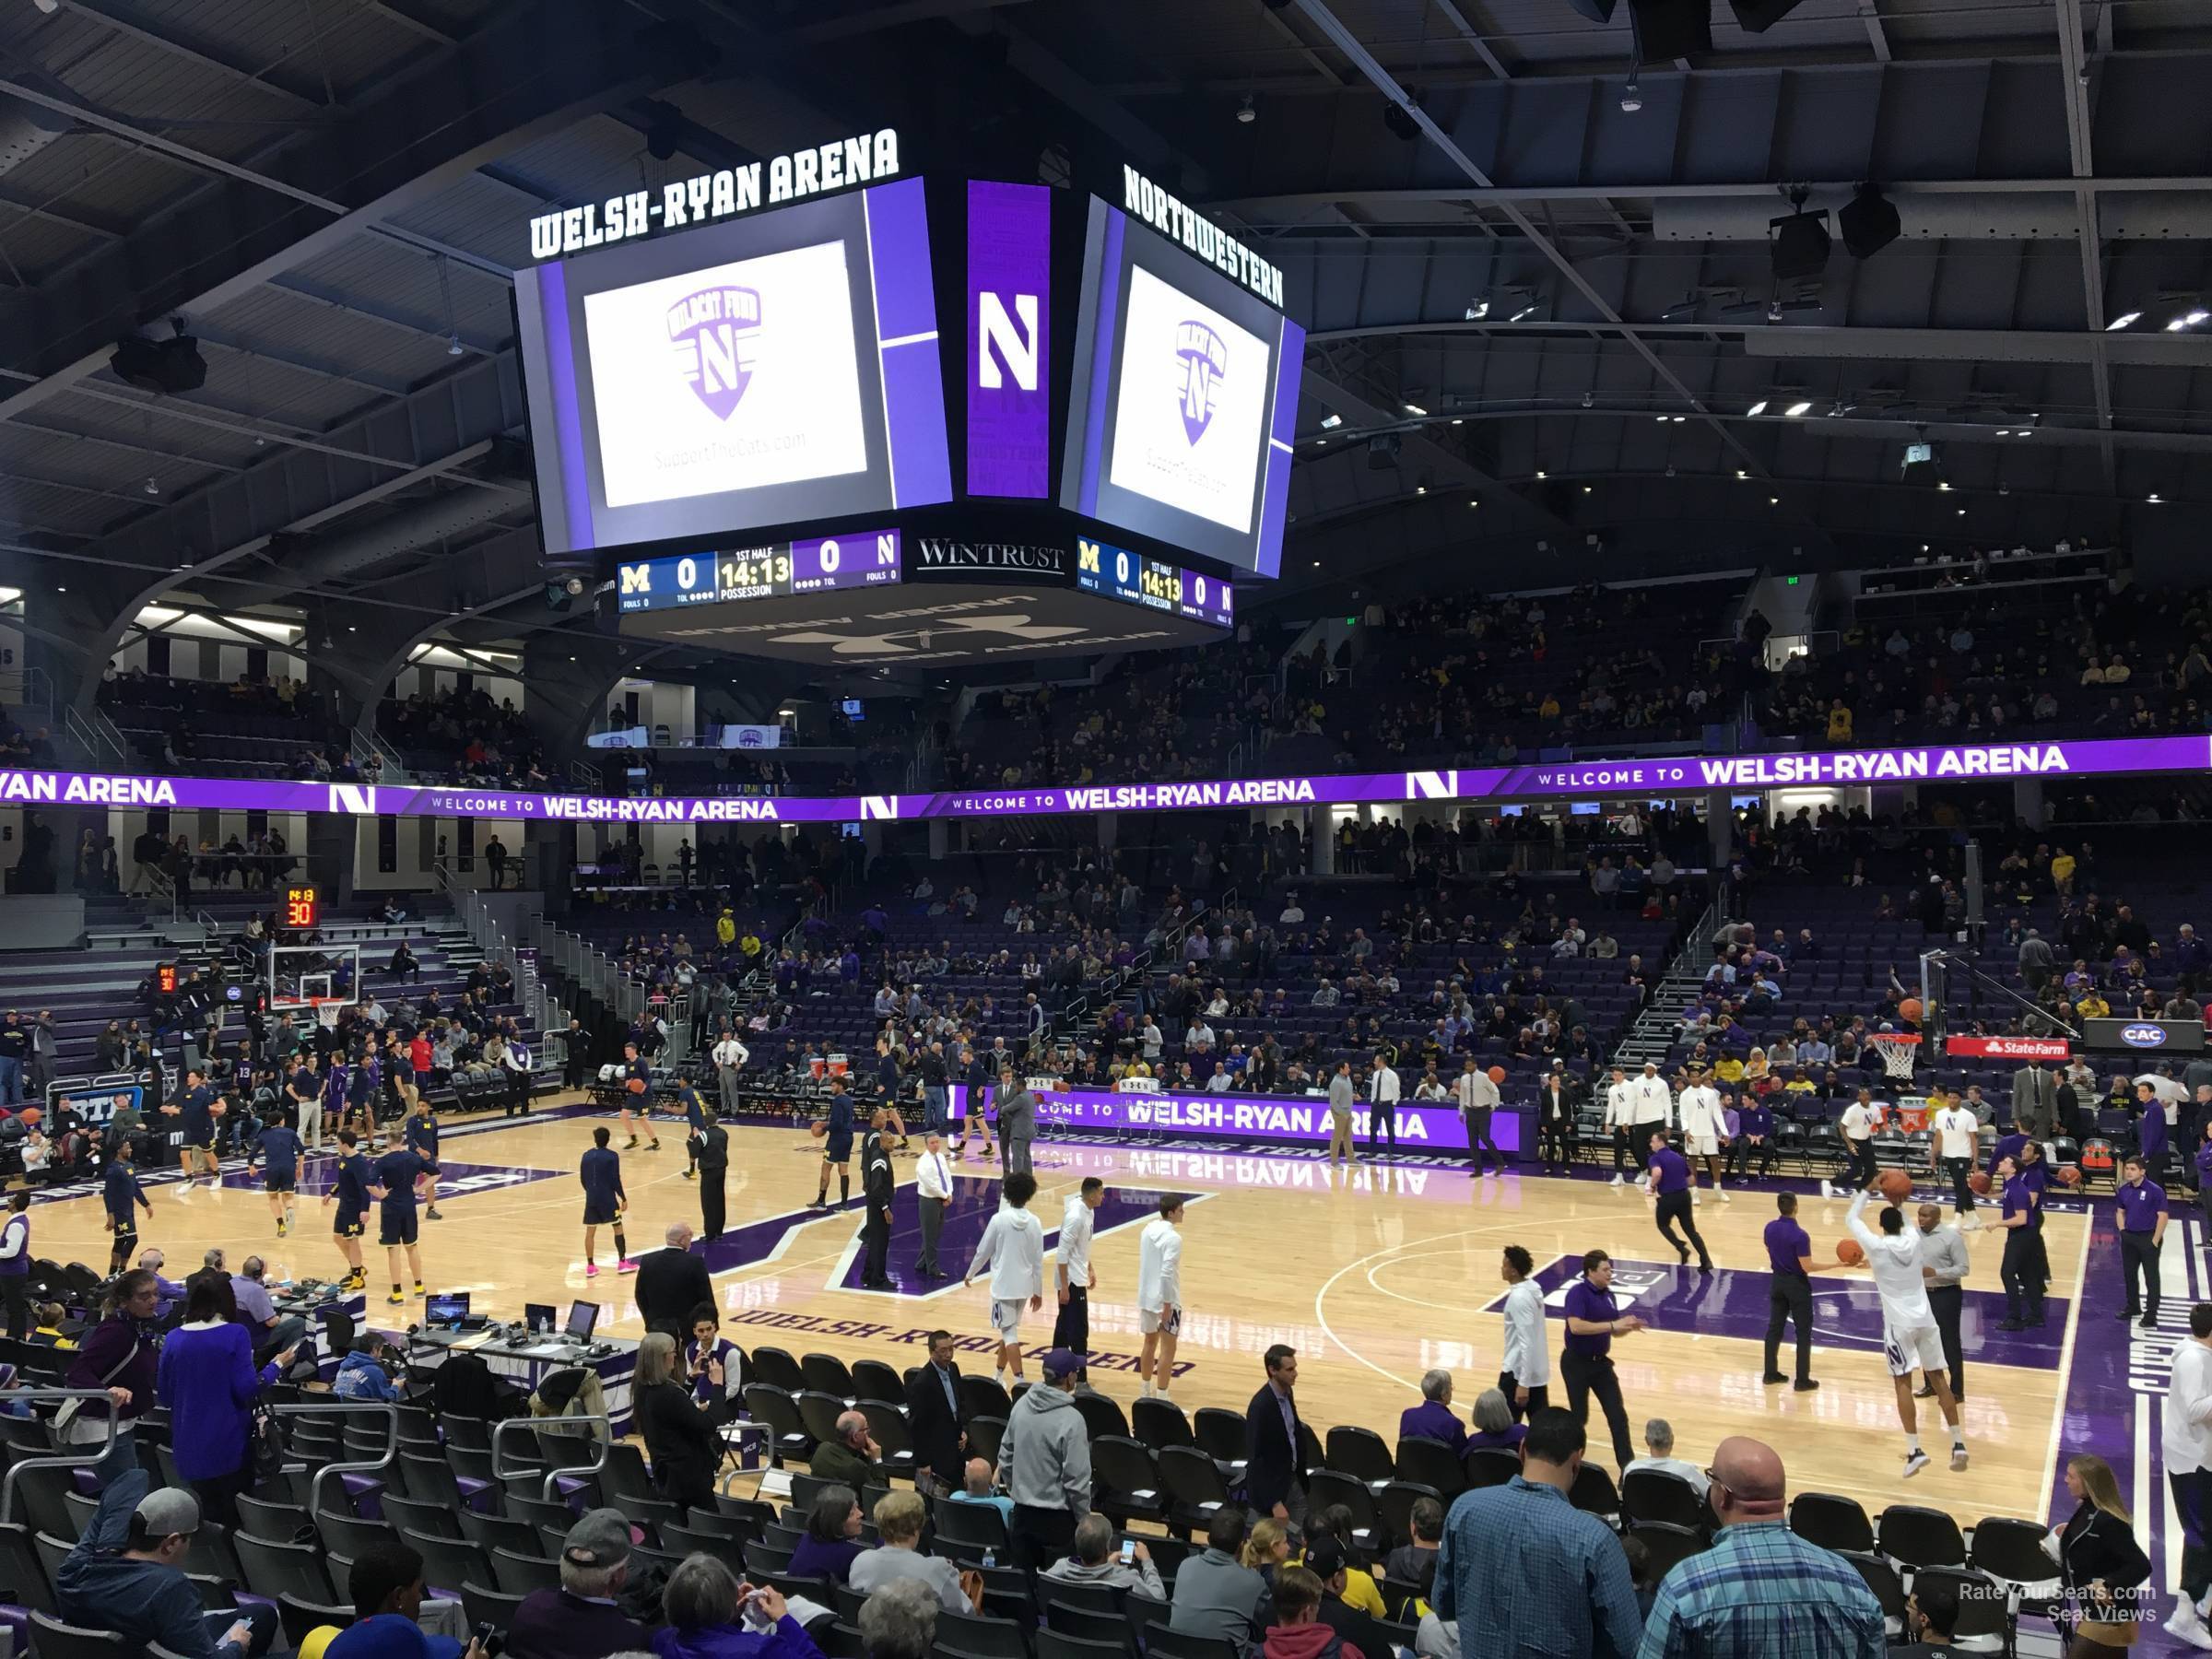 Section 115 at WelshRyan Arena